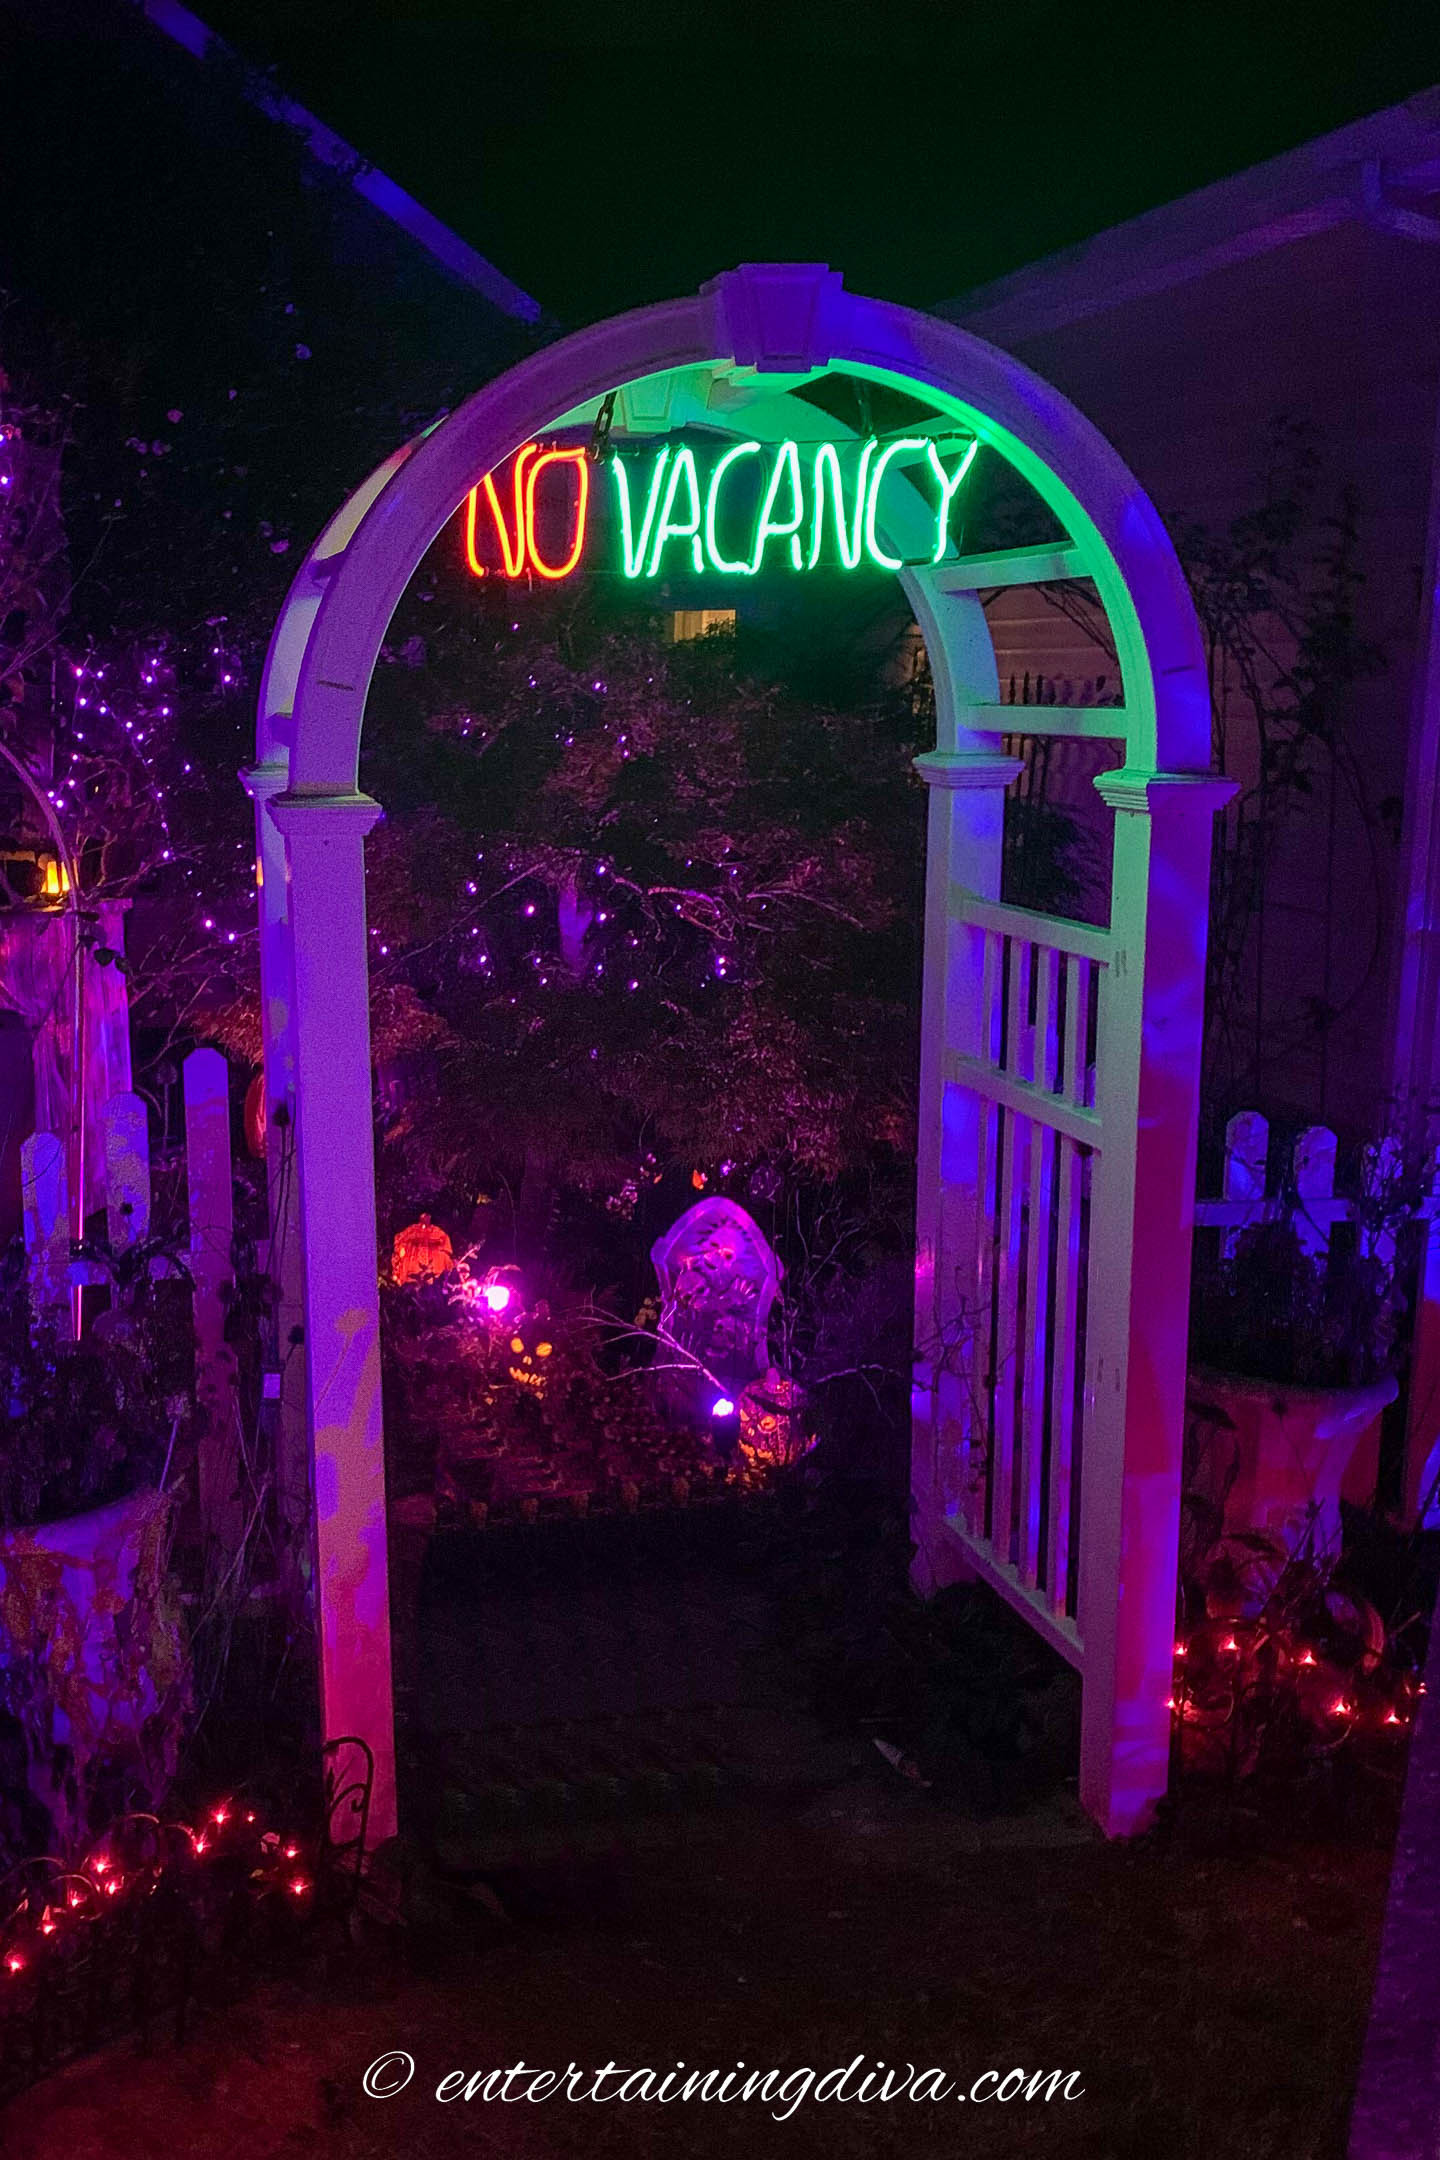 No Vacancy neon sign hung in an arbor decorated for Halloween